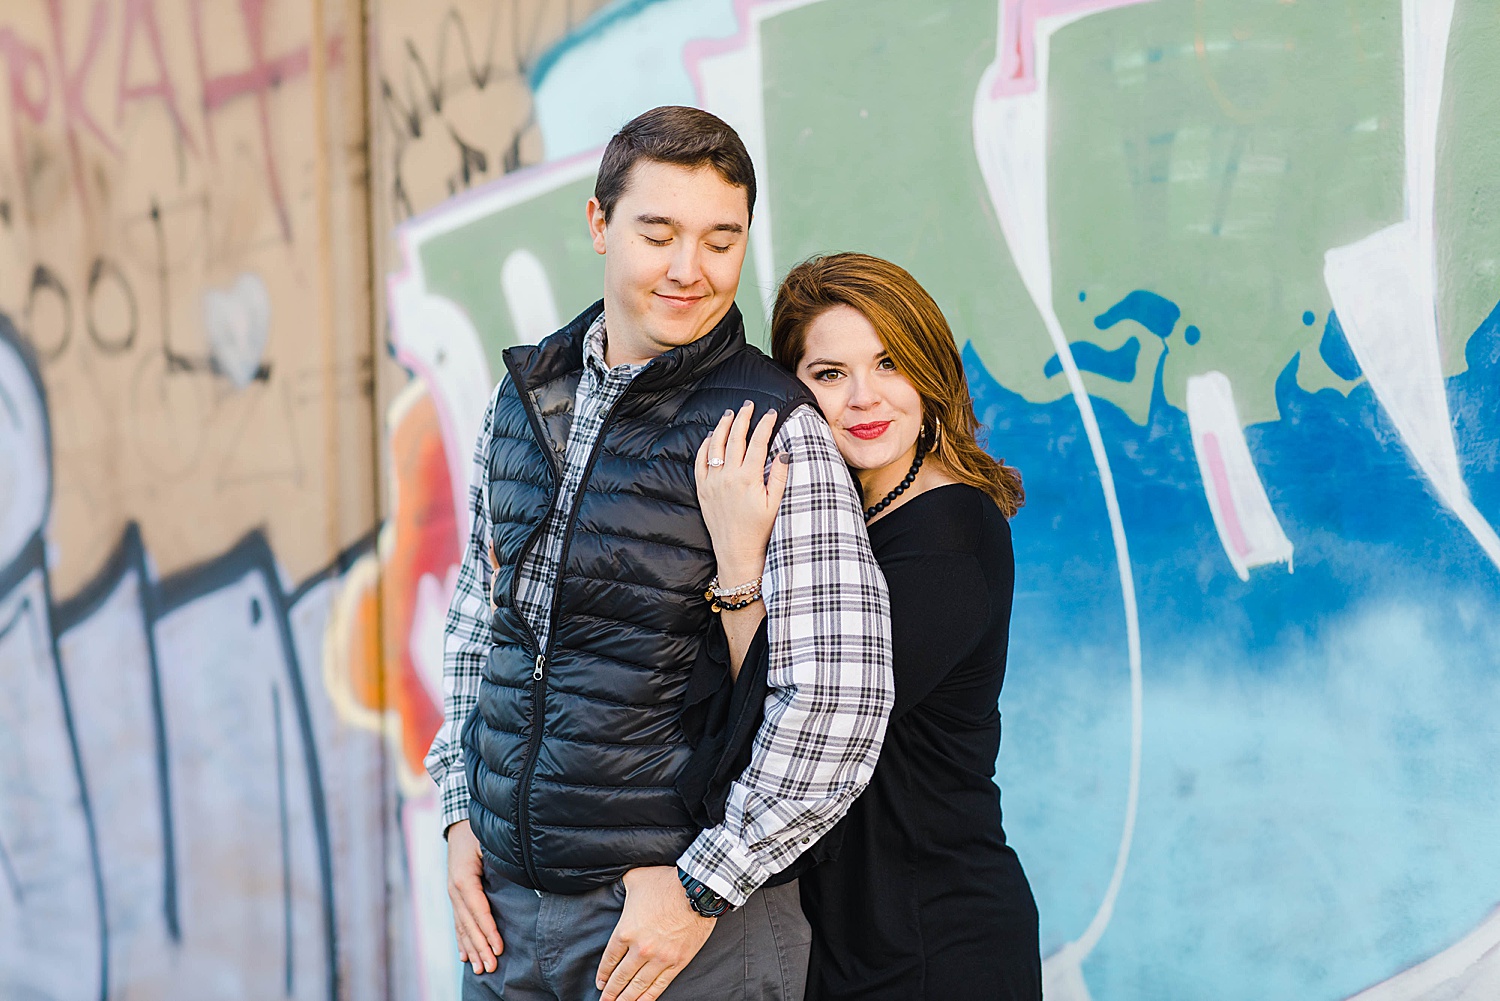 urban style engagement session in Downtown Birmingham AL